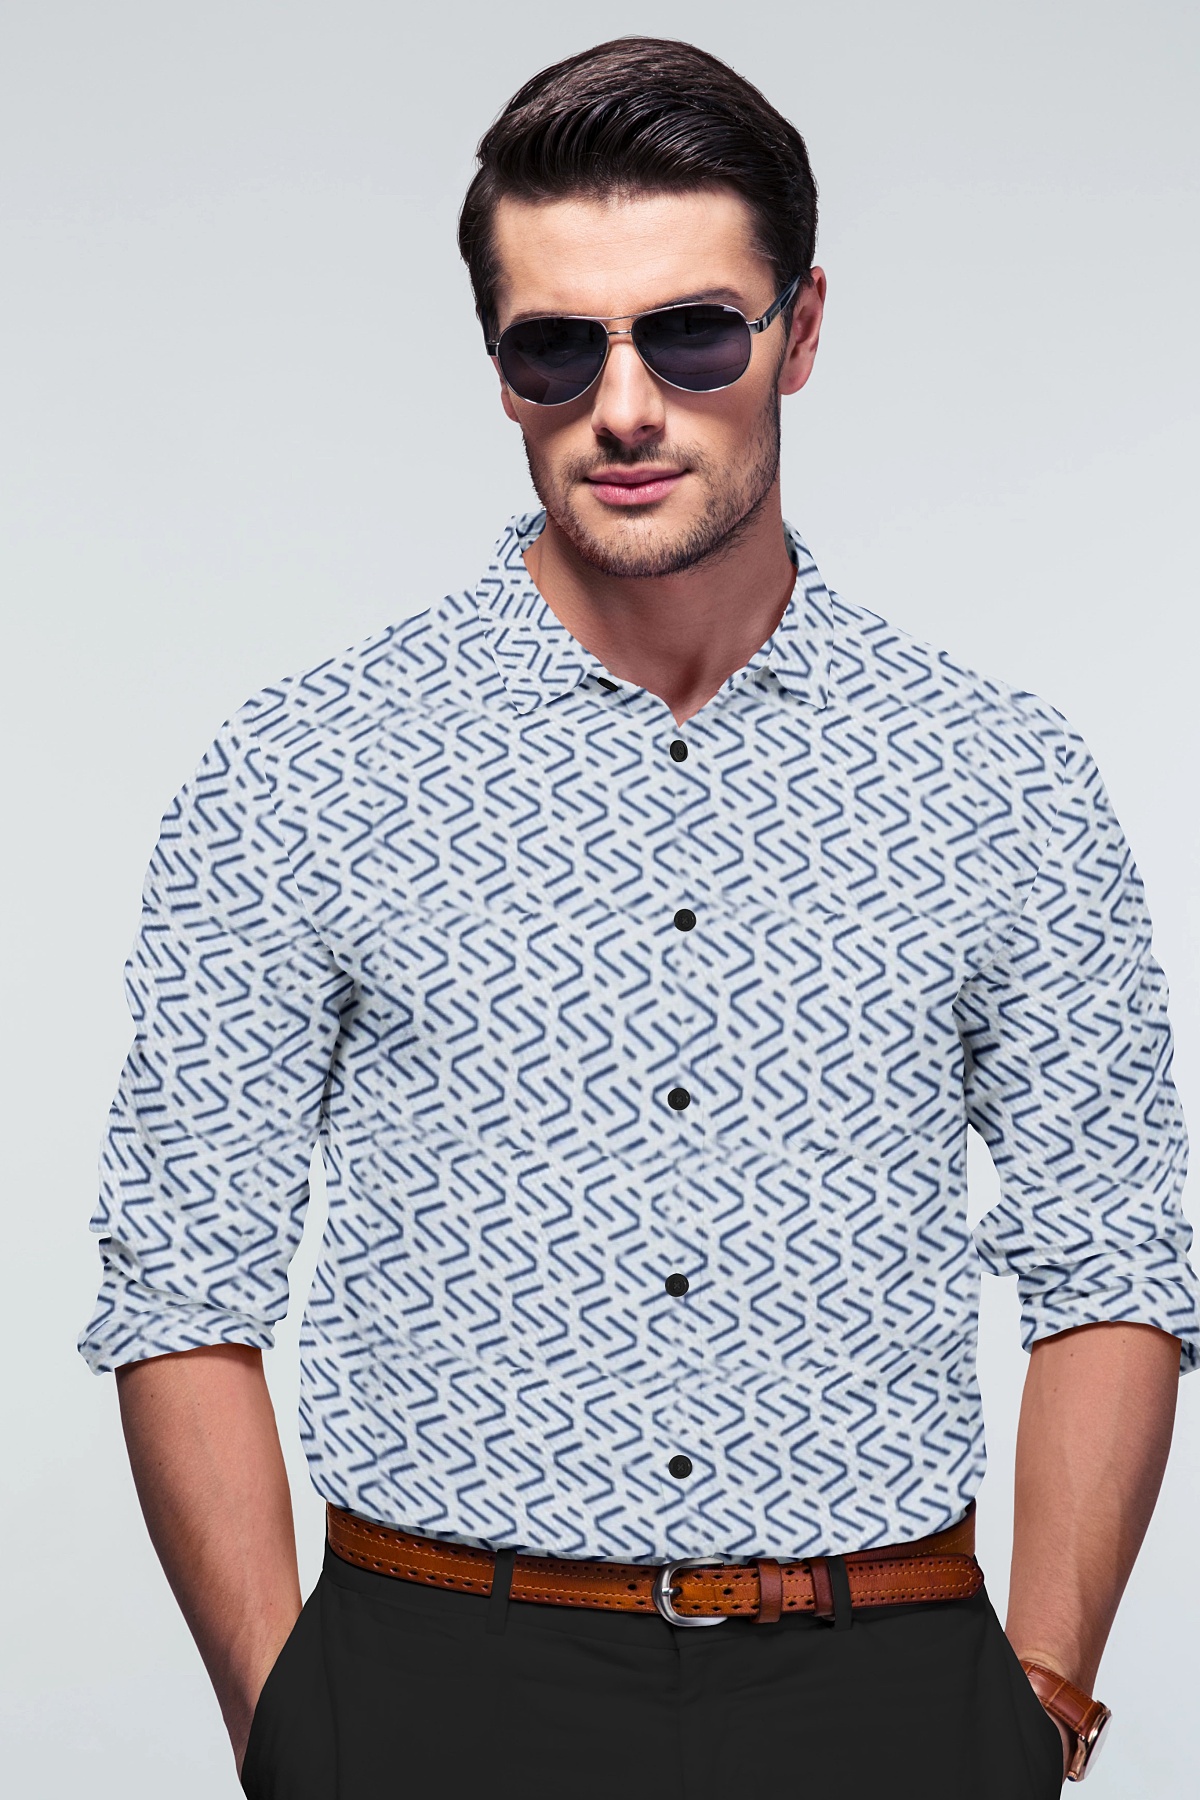 XXXL Shirts for Men designed for comfort and style